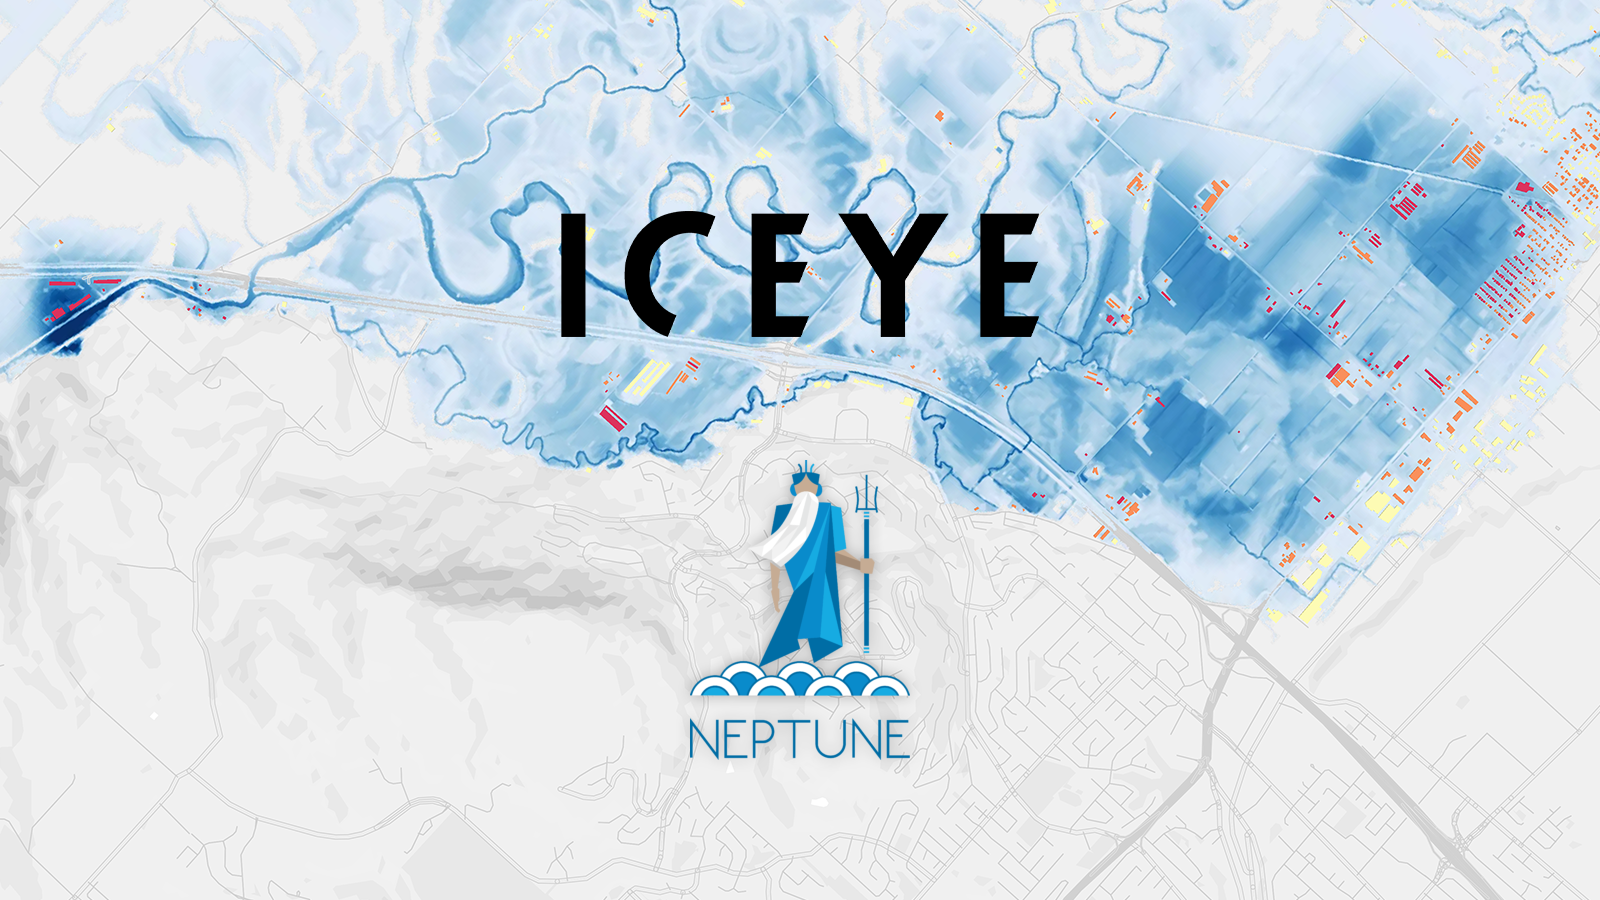 ICEYE and Neptune Flood logos on top of ICEYE's flood visualization.